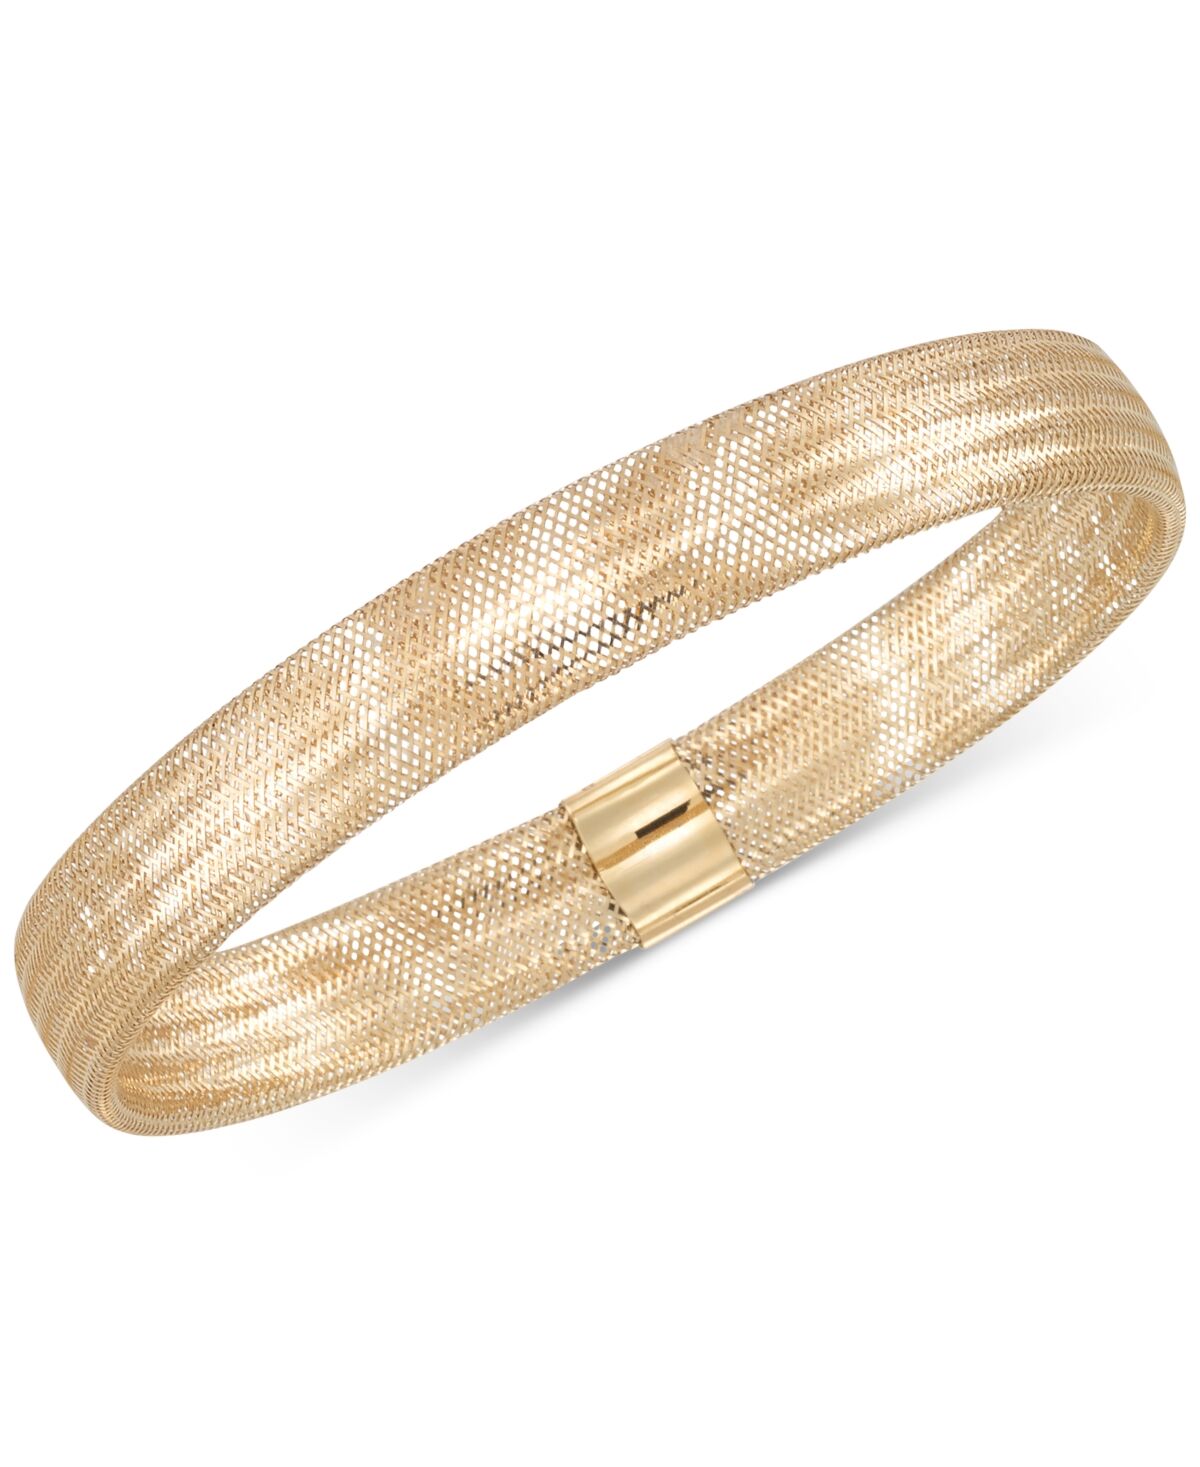 Italian Gold Stretch Bangle Bracelet in 14k Yellow, White or Rose Gold, Made in Italy - Yellow Gold